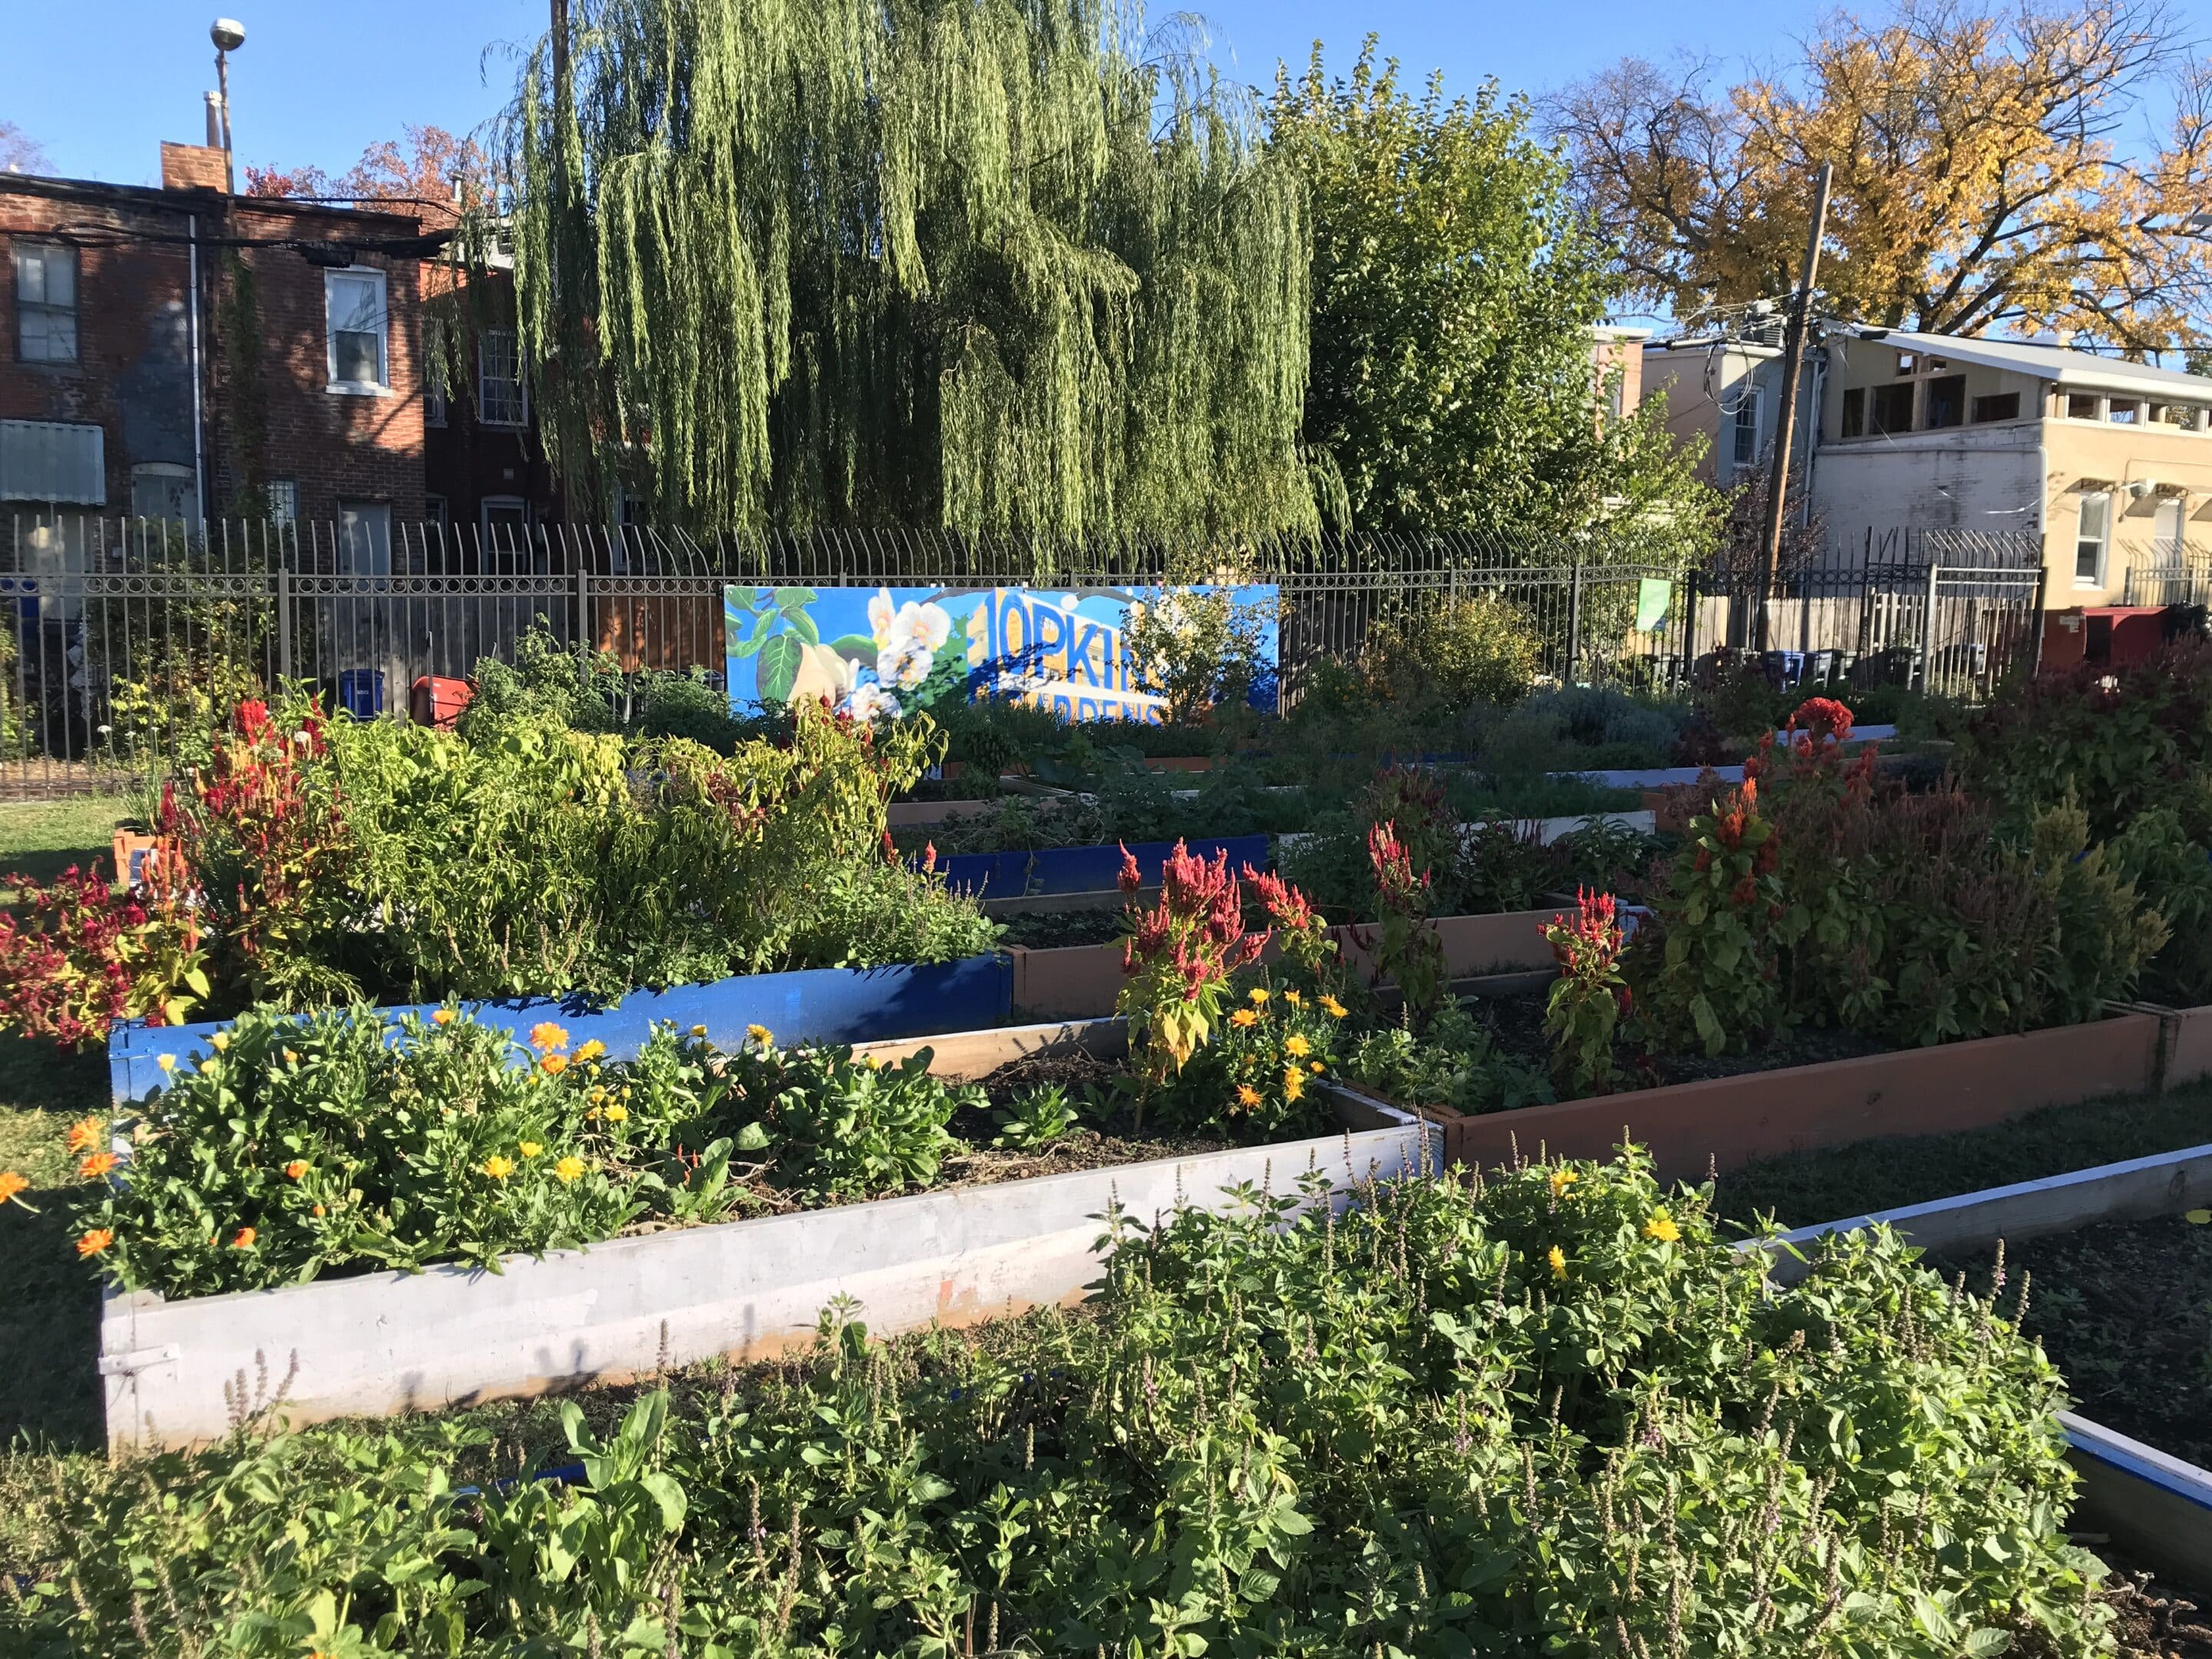 Urban community garden with raised beds of vibrant flowers and plants, surrounded by a metal fence, with graffiti-decorated walls and trees in the background.